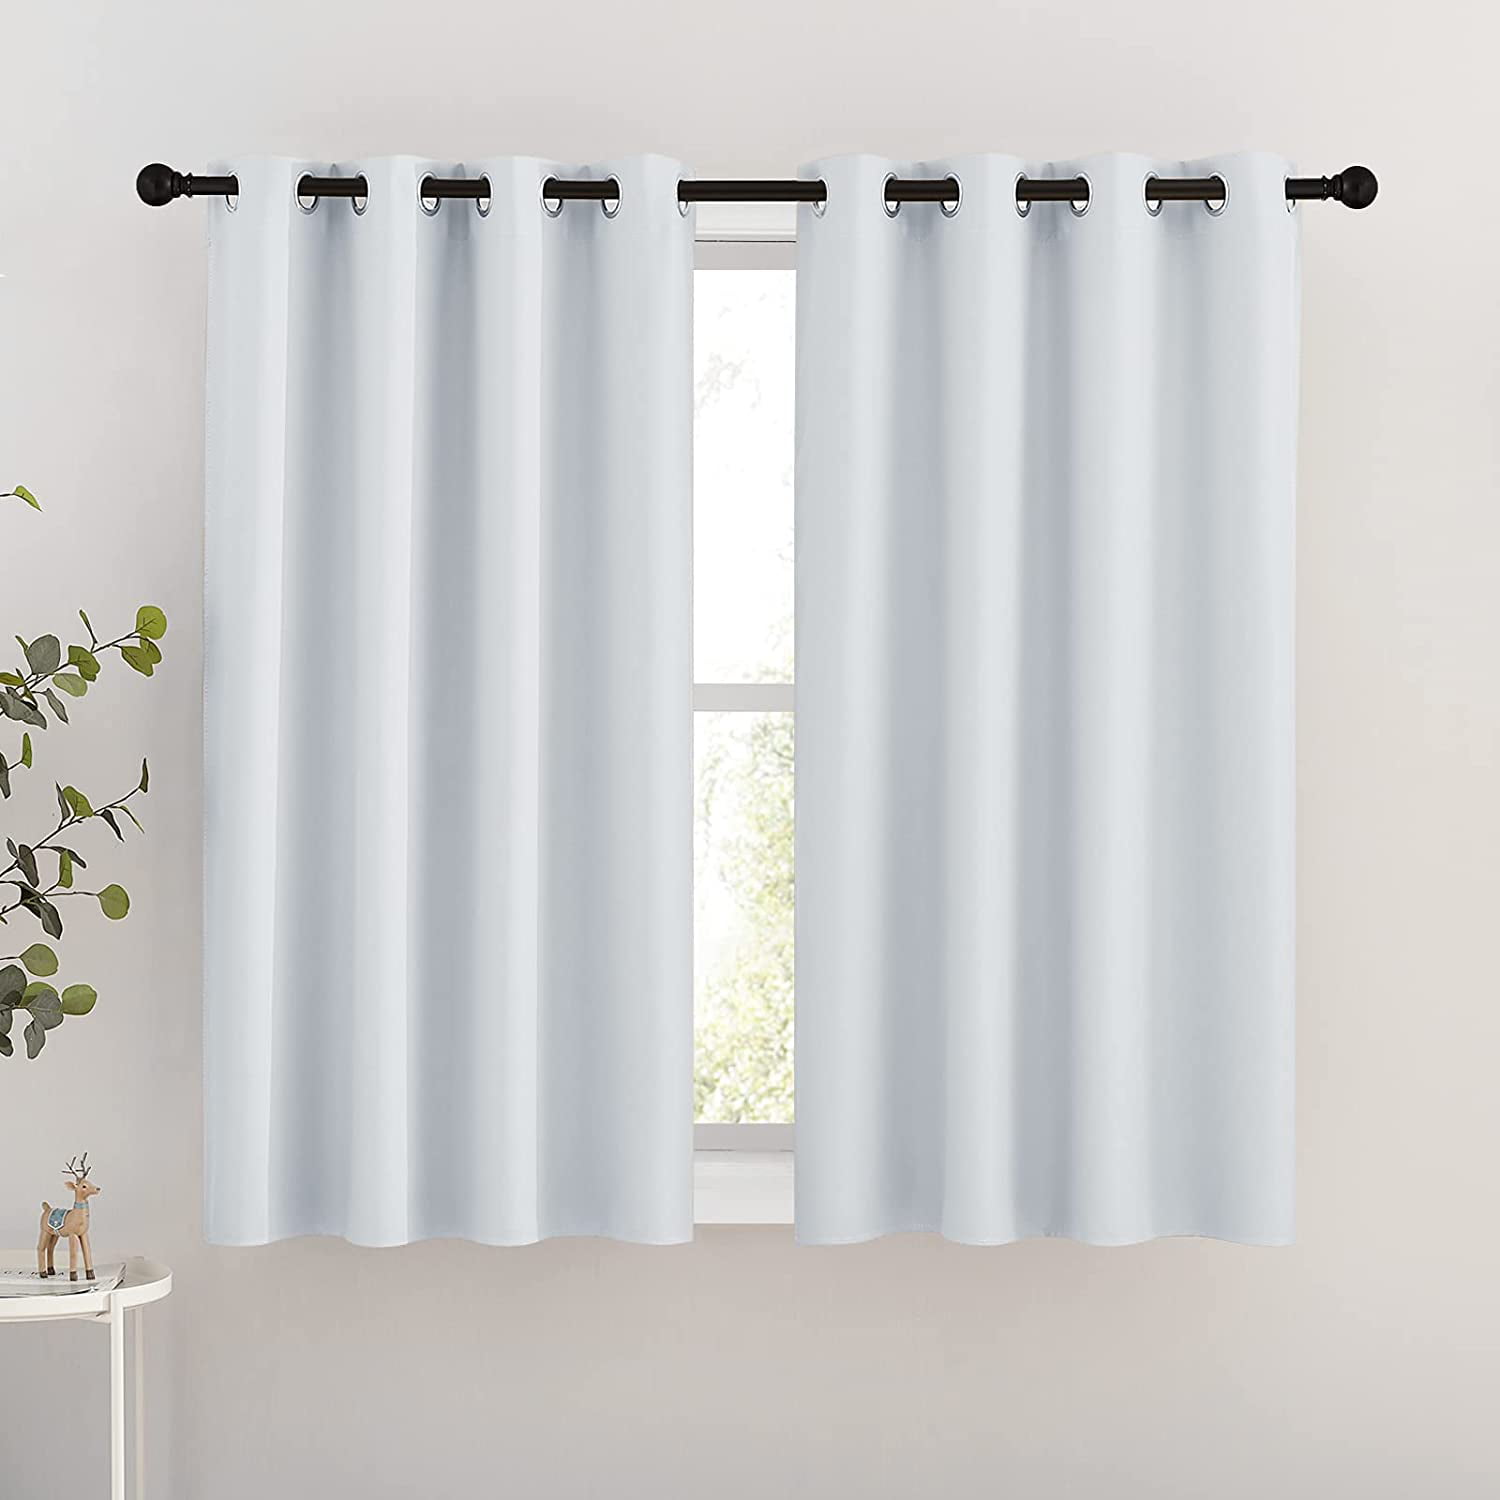 W46 x L54 Inch 2 Curtain Panels Beige Warm Harbor Blackout Curtains – Thermal Insulated Noise Reducing Bedroom and Living Room Curtains